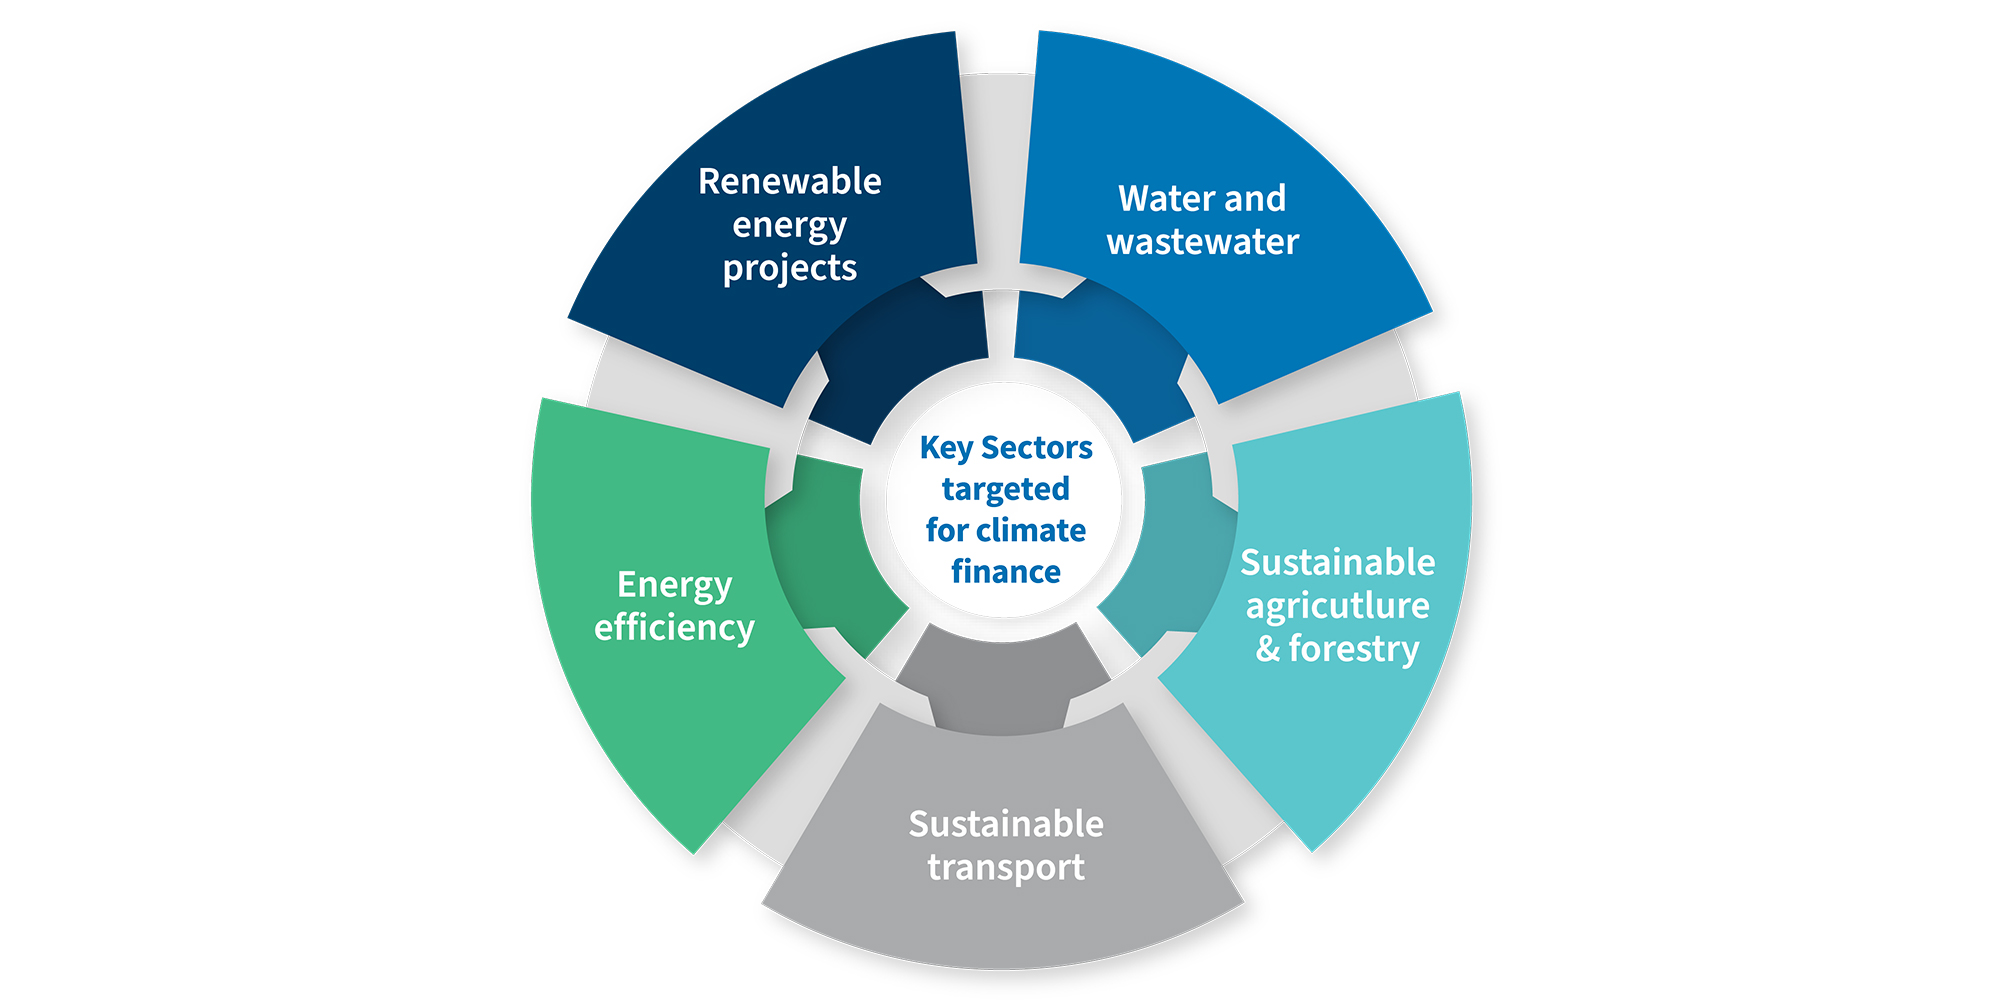 Key sectors geared for climate finace: renewable energy projects, water and wastewater, sustainable agriculture & forestry, sustainable transport, energy efficiency